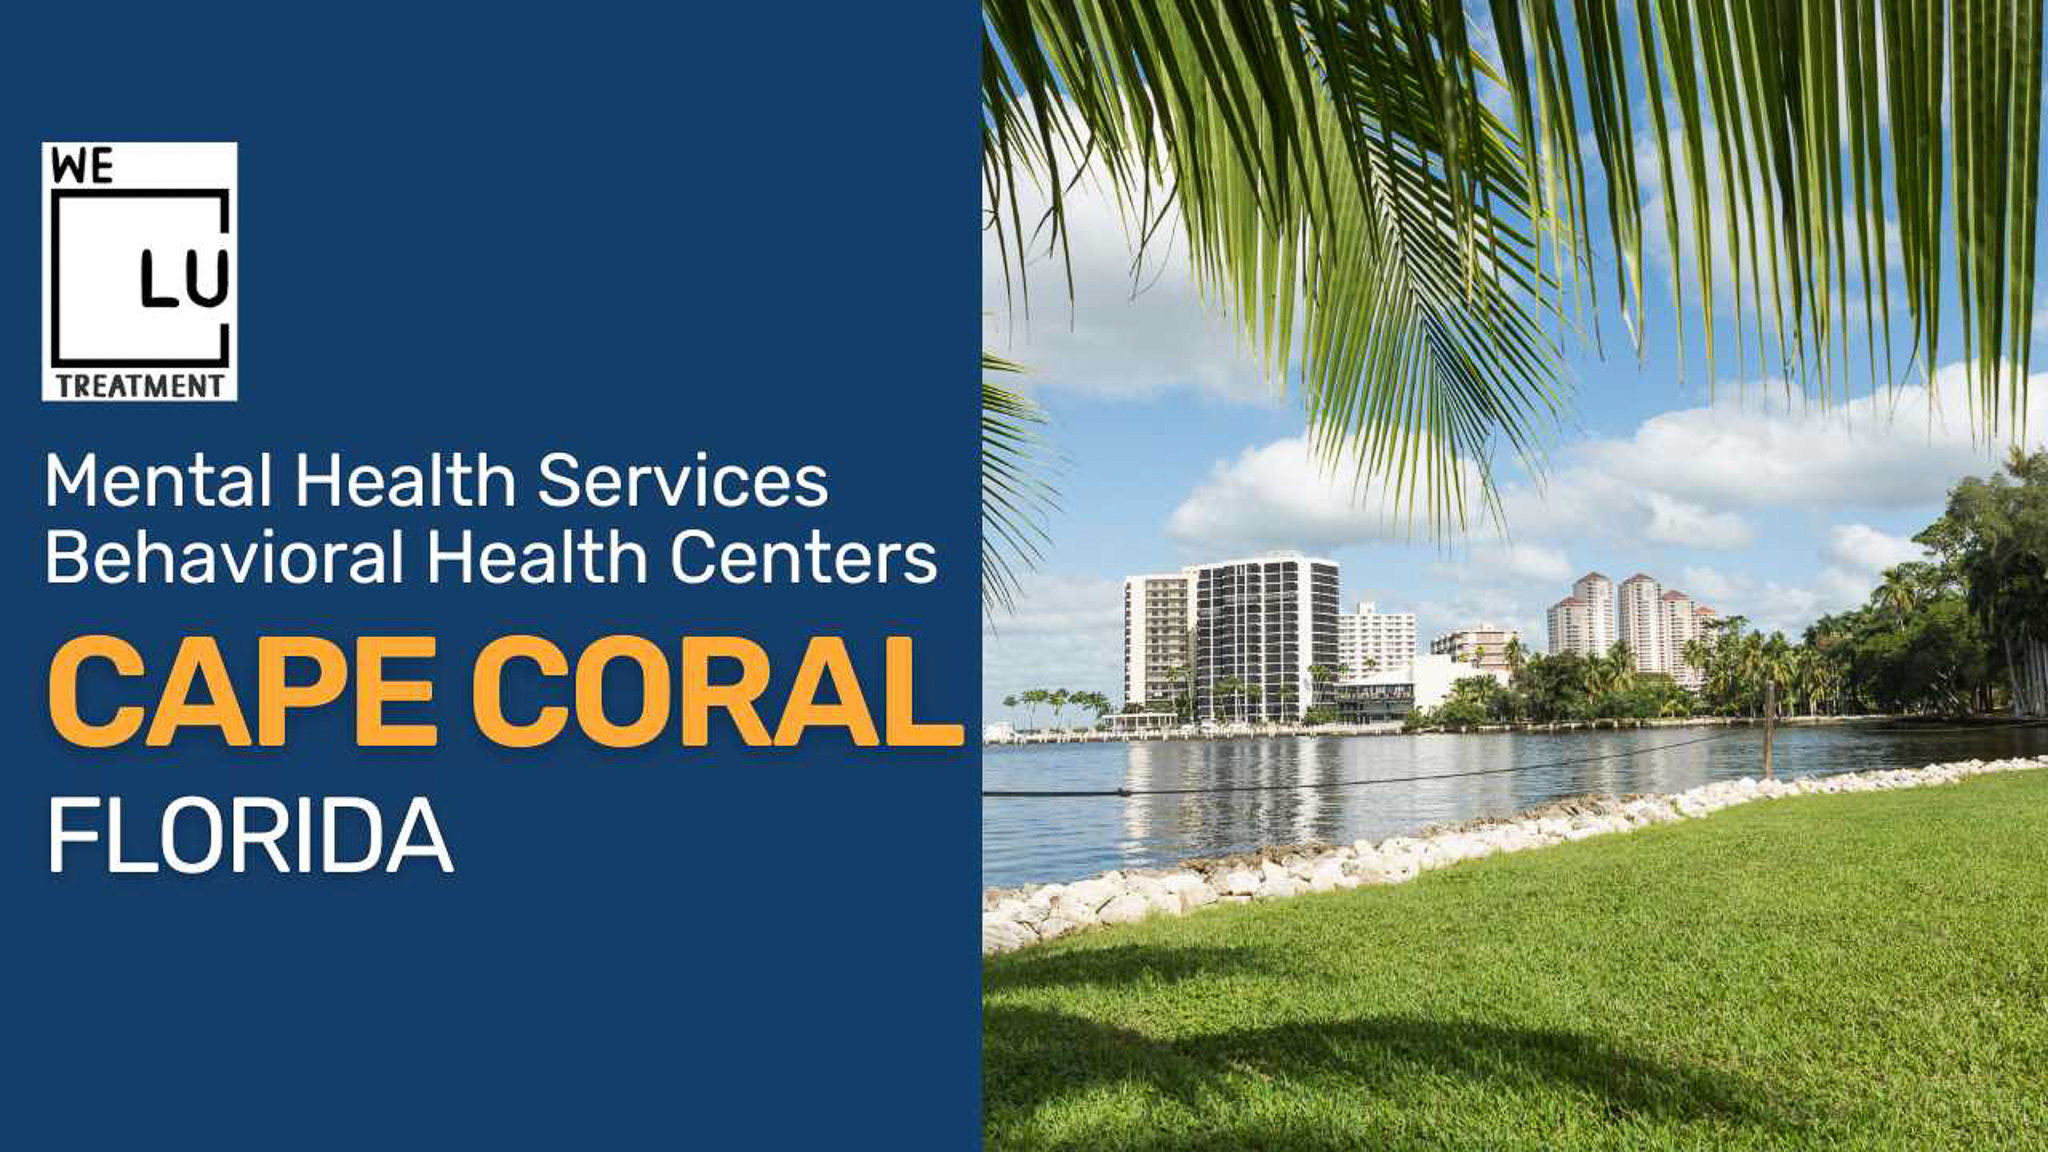 Cape Coral FL (MH) We Level Up treatment center for drug and alcohol rehab detox and mental health services - Image 1